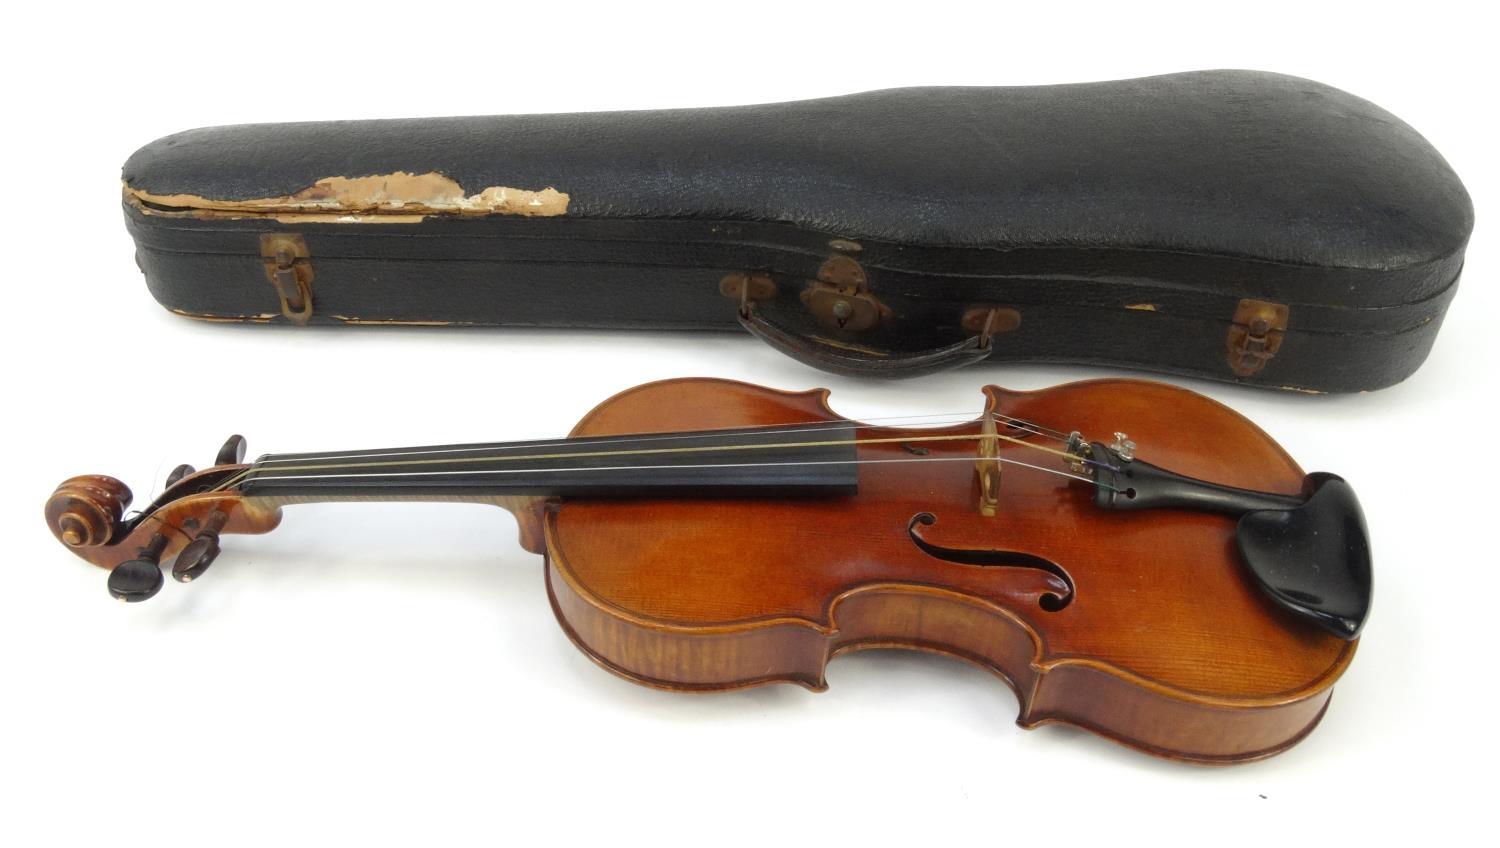 Cased wooden violin with paper label 'Paolo Fiorini Taurini 1928', the back 37cm long - Image 7 of 13